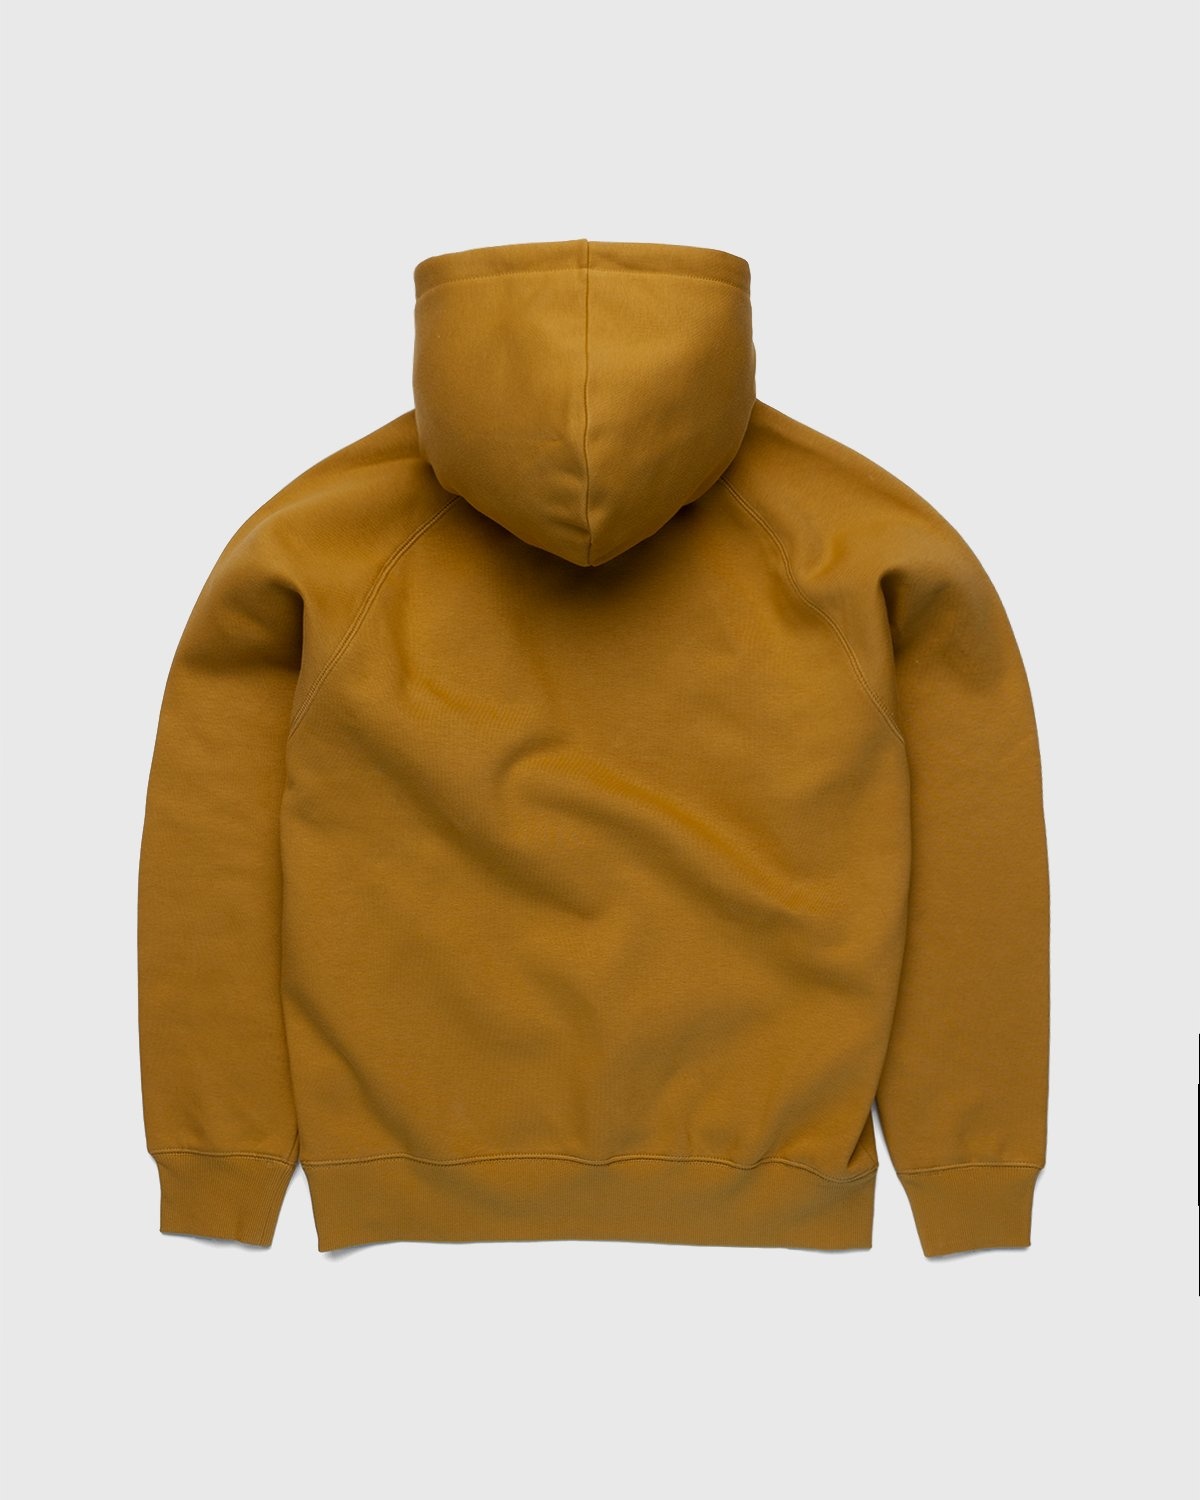 Carhartt WIP – Hooded Chase Sweat Gold - Sweats - Brown - Image 2